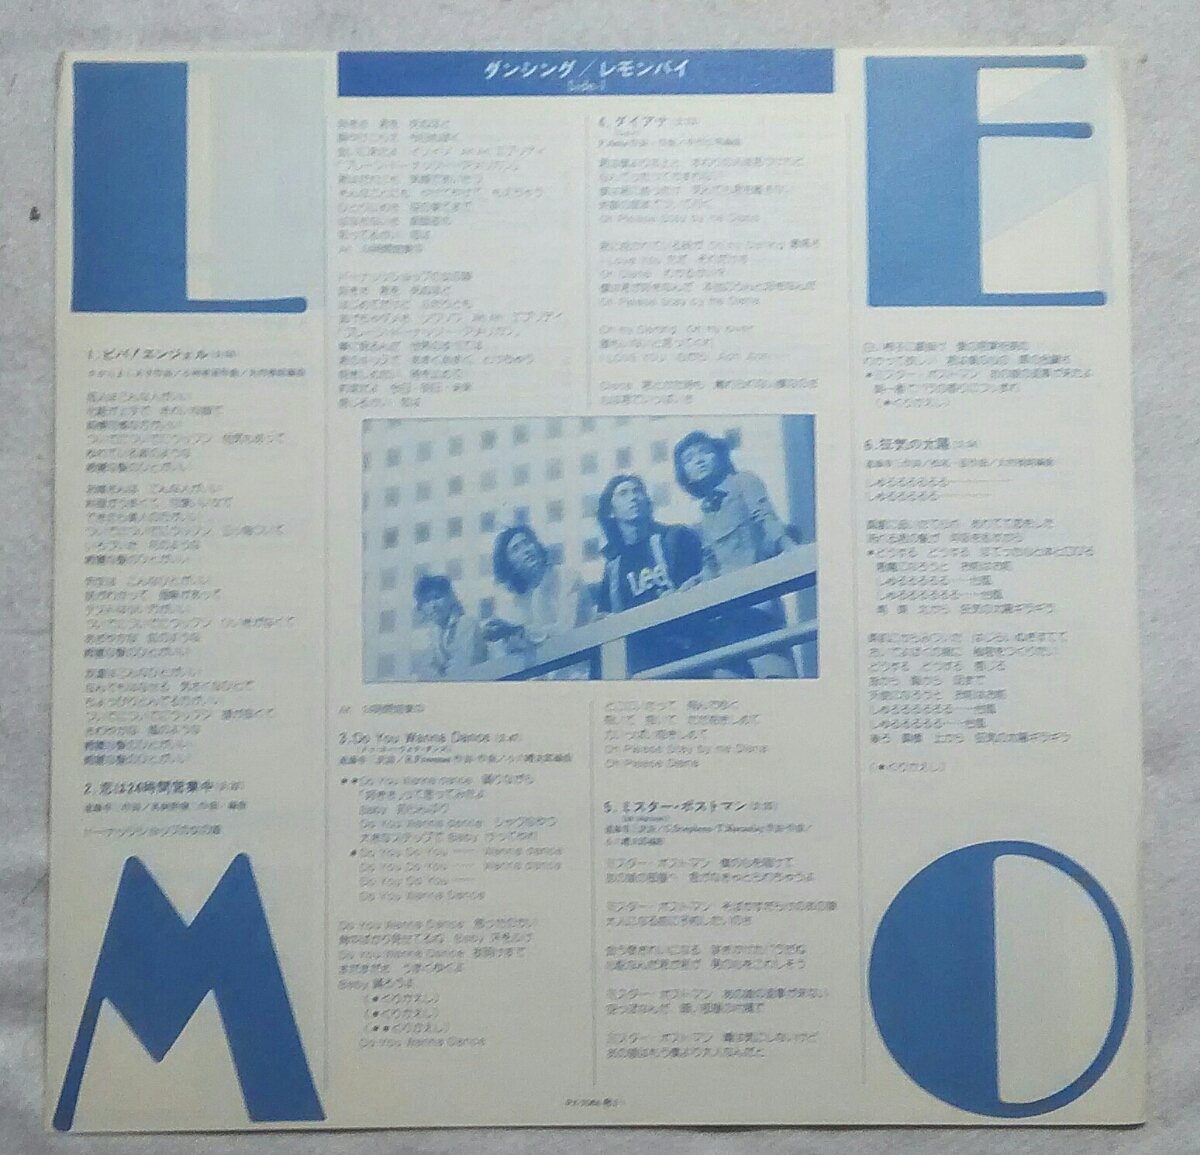 1LP lemon pie / Dan singPX-7064 Mr. post man other . cover great number compilation translation equipped 